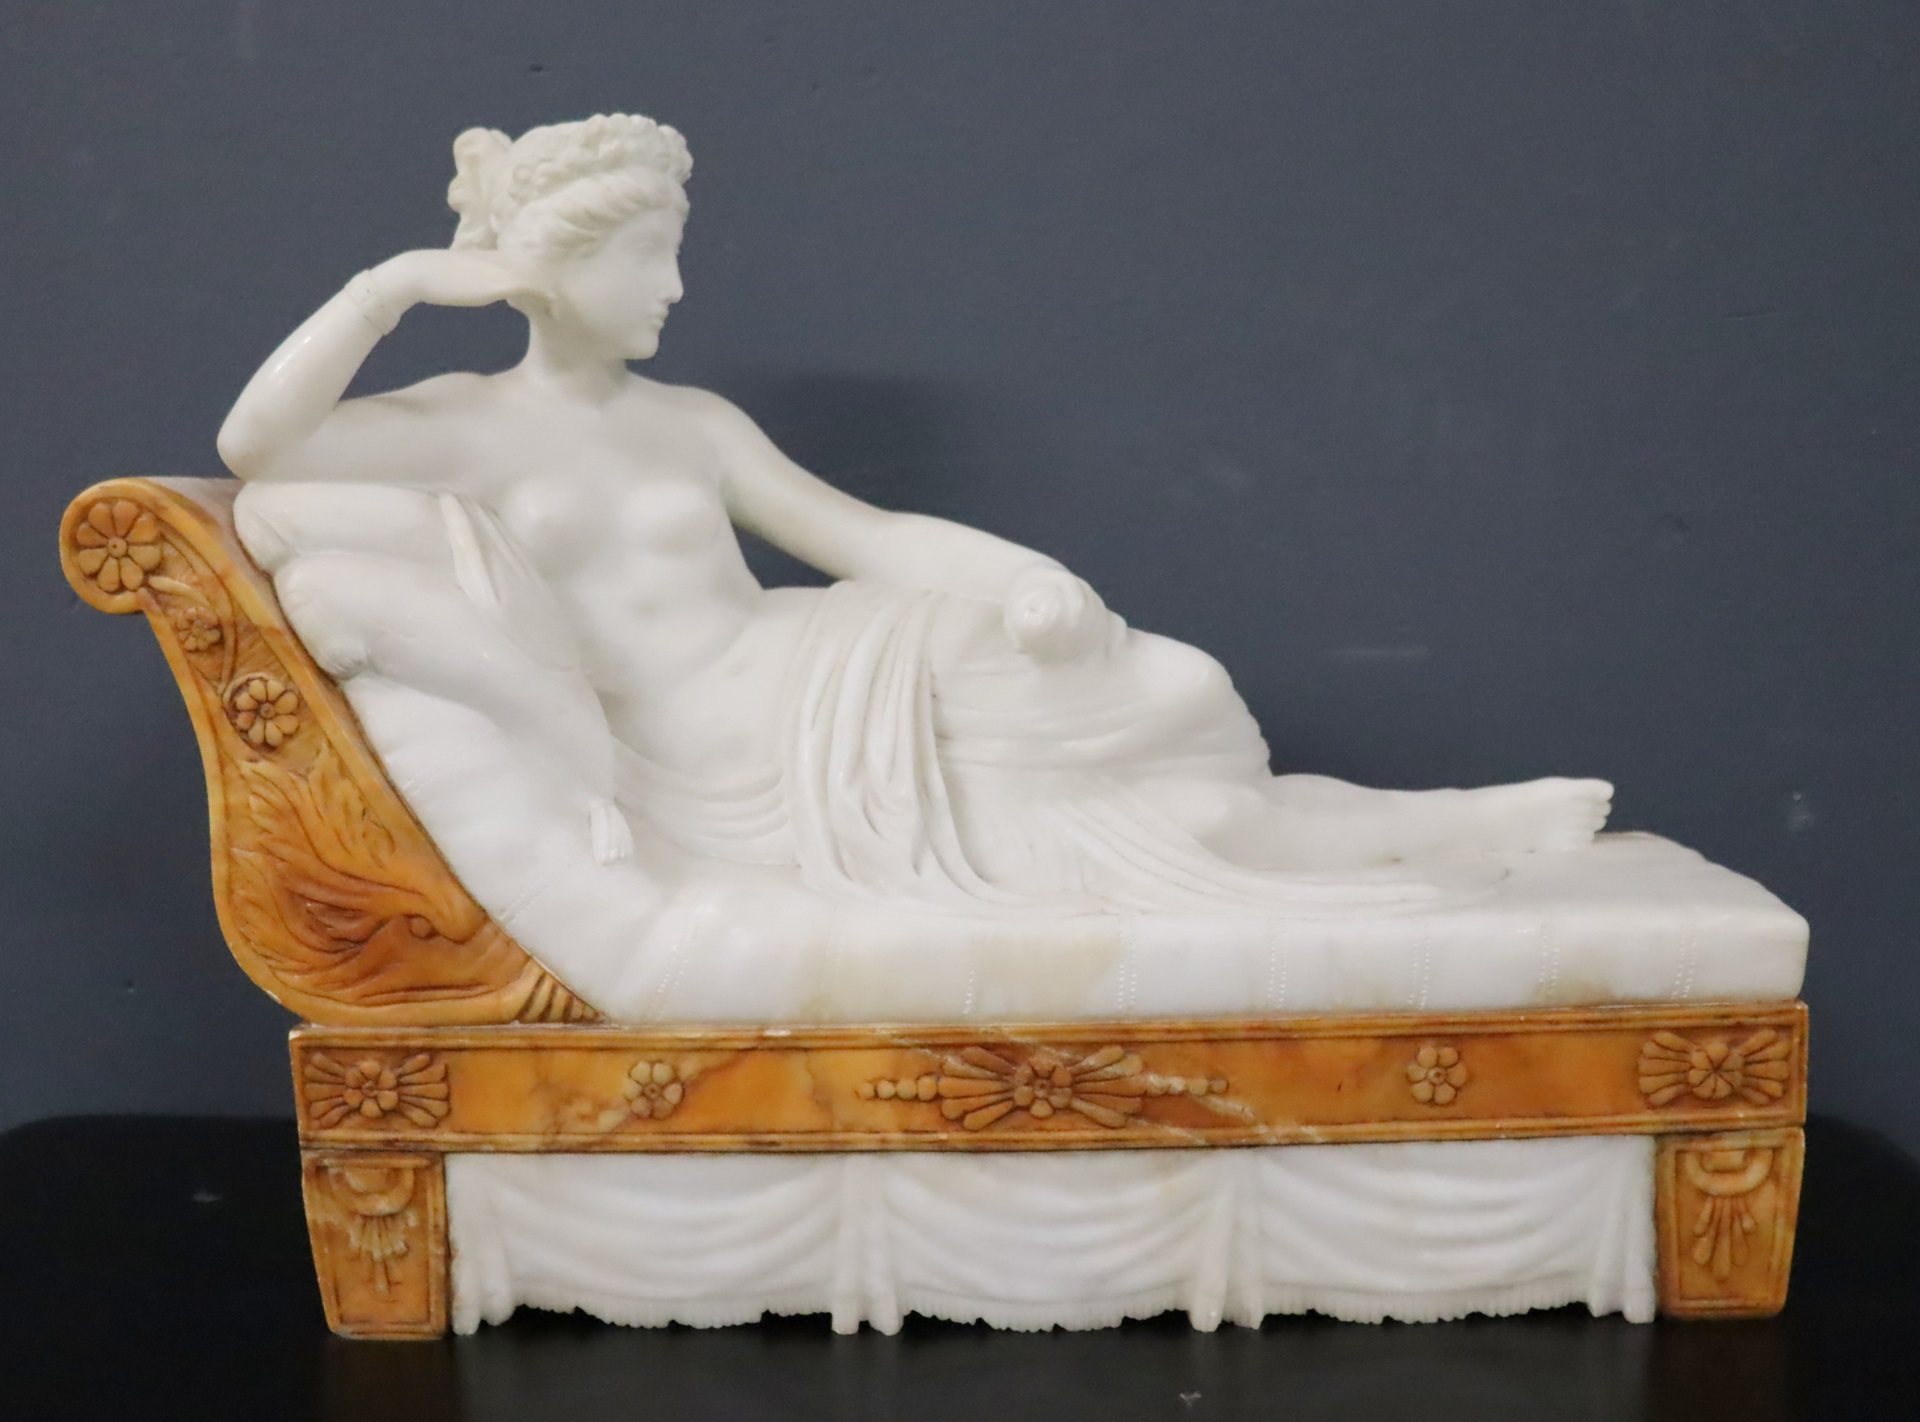 UNSIGNED MARBLE SCULPTURE OF A